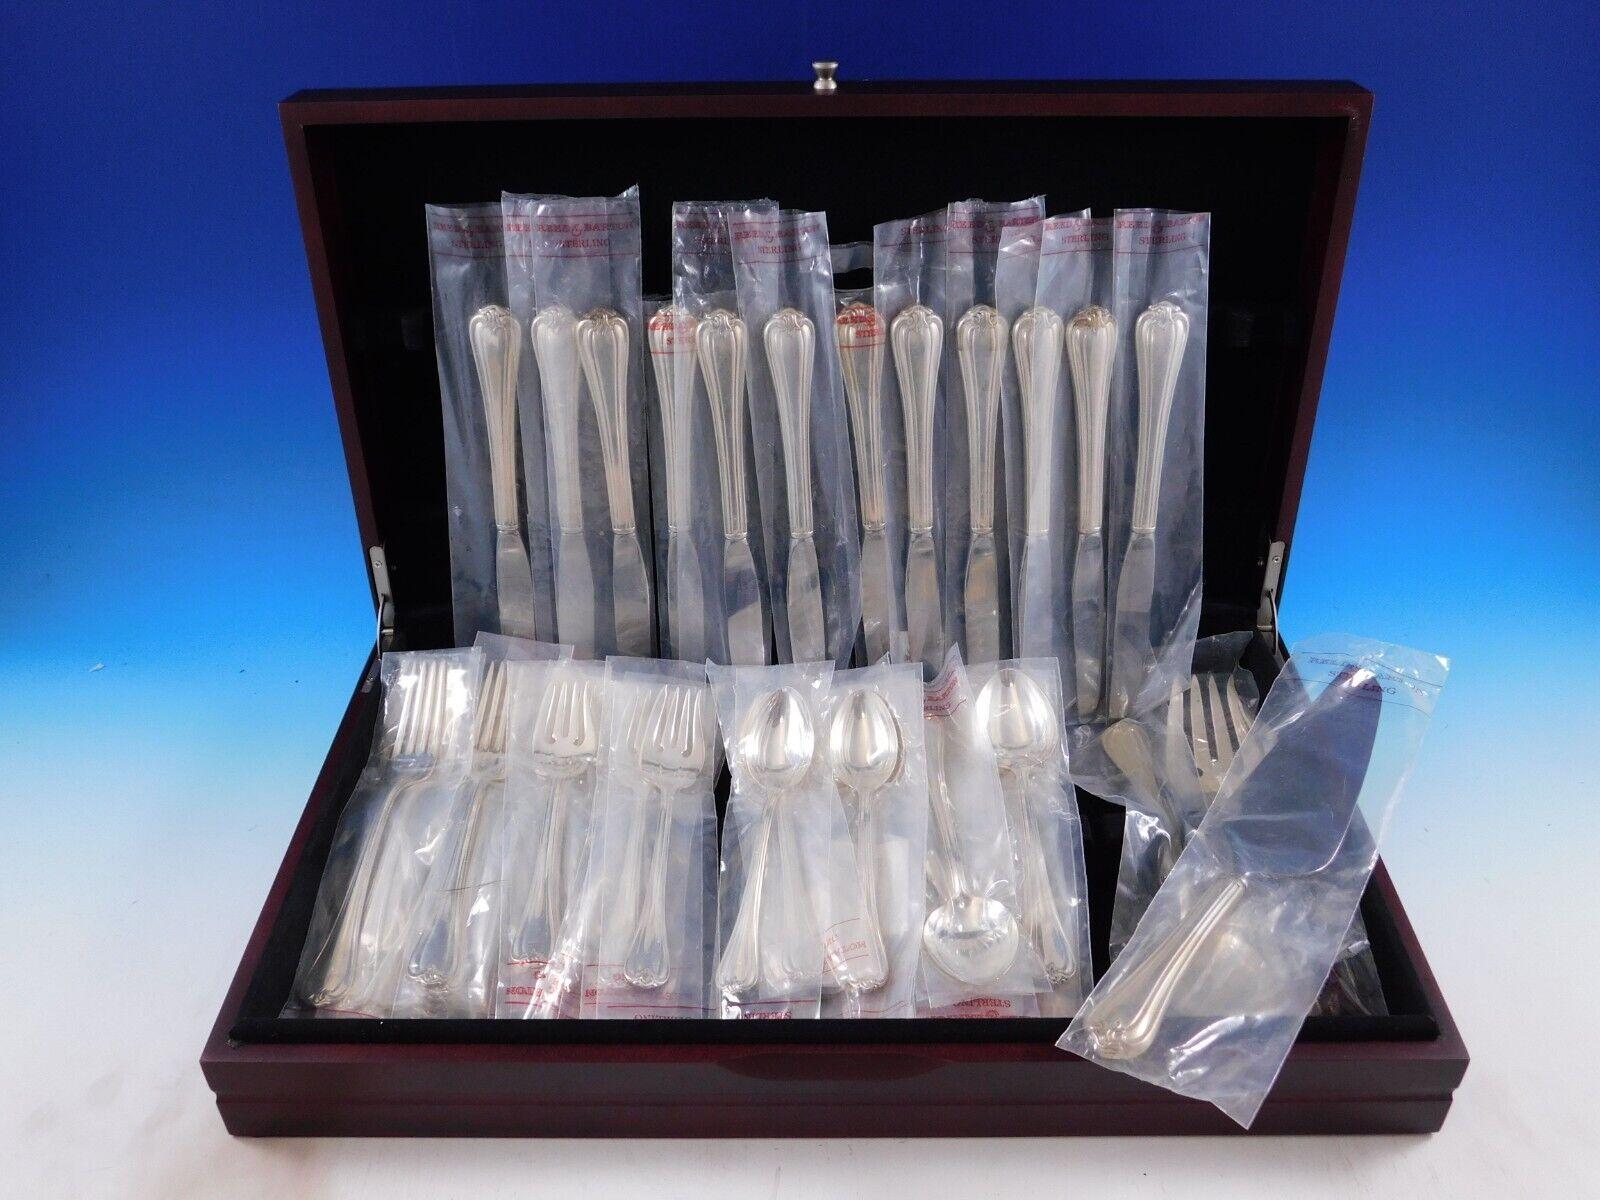 Unused Woodwind by Reed & Barton Sterling Silver Flatware set - 63 pieces. This set includes:

12 Knives, 9